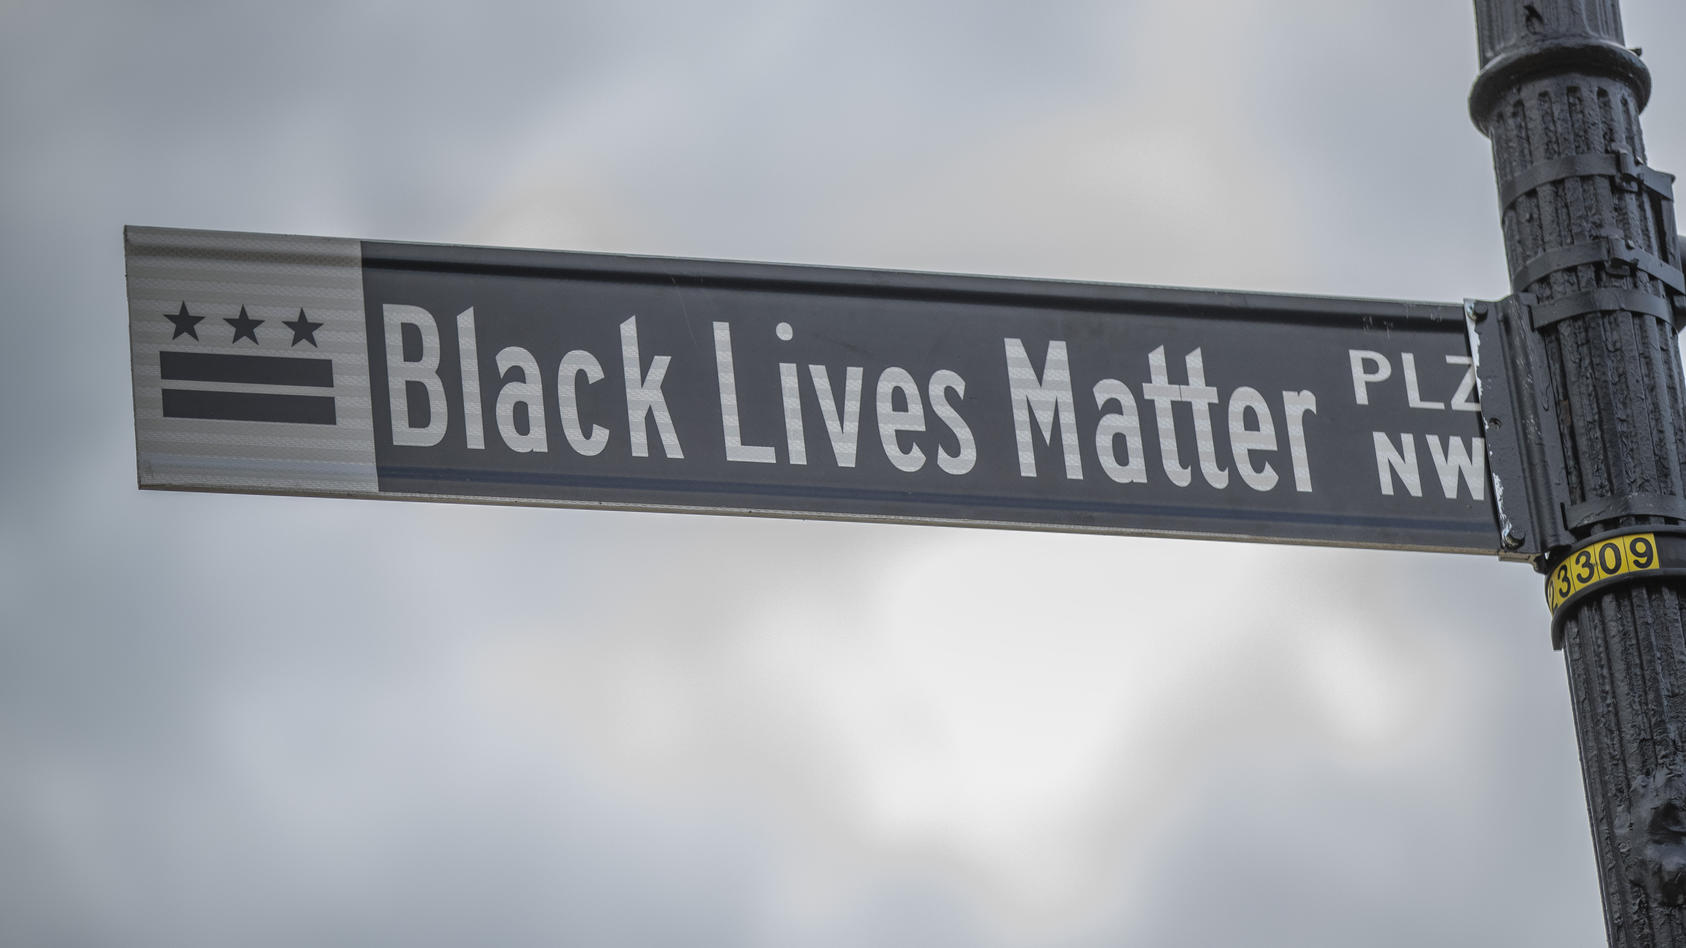 january-18-2021-washington-district-of-columbia-usa-the-black-lives-matter-plz-nw-street-sign-sits-on-a-clody-day-in-the-united-states-capital